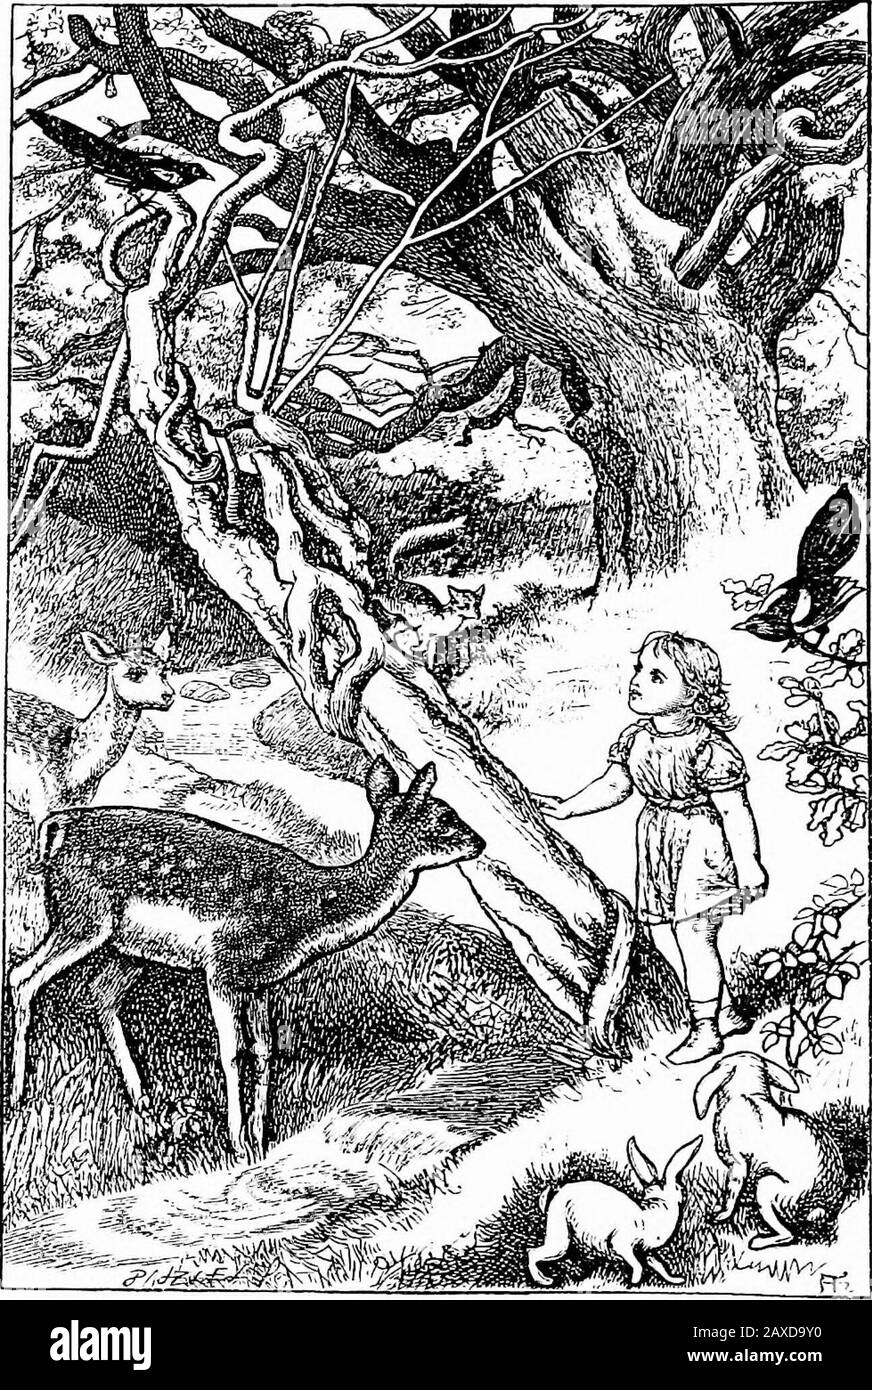 Parables and tales . Not yet to her was Natures ageIn gnarled and hollow shapes reealcd. p. 63 Parables and Tales. BV THOMAS GORDON HAKE, AUTHOR OF MADELINE, ETC. WITH ILLUSTRATIONS BY ARTHUR HUGHES. LONDON: CHAPMAN AND HALL, 193 PICCADILLY. 1872. Co Mother and ChildThe Cripple ...The Blind Boy ...Old MoralityOld Souls NTENTS. PaneII 22 35 46 The Lily OF THE Valley 60 The Deadly, Nightshade ... ... 77 The Poetcu31924077144040 Stock Photo